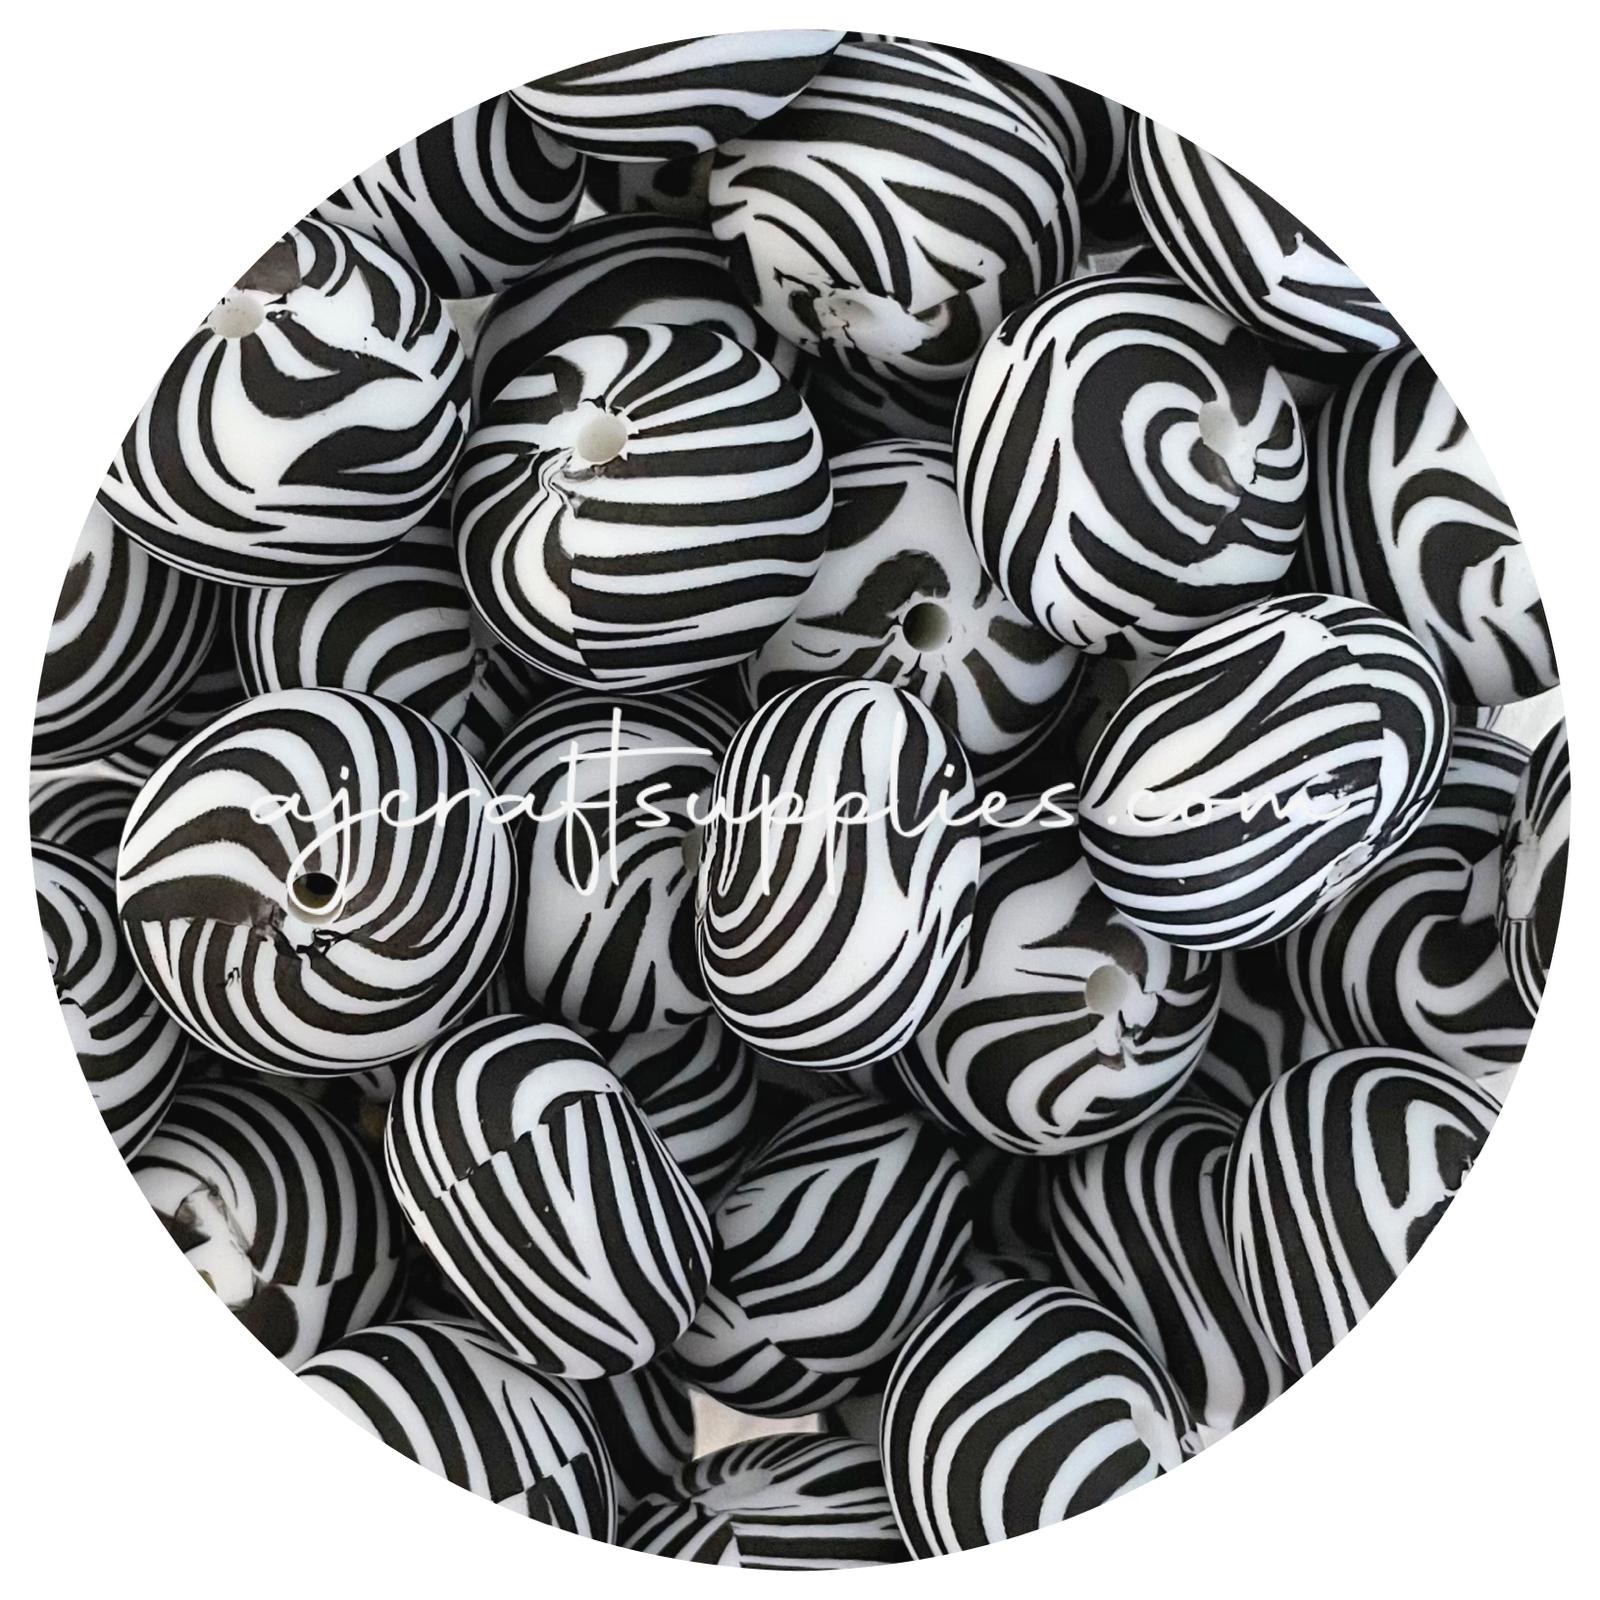 Zebra - 22mm abacus Silicone Beads - 5 beads